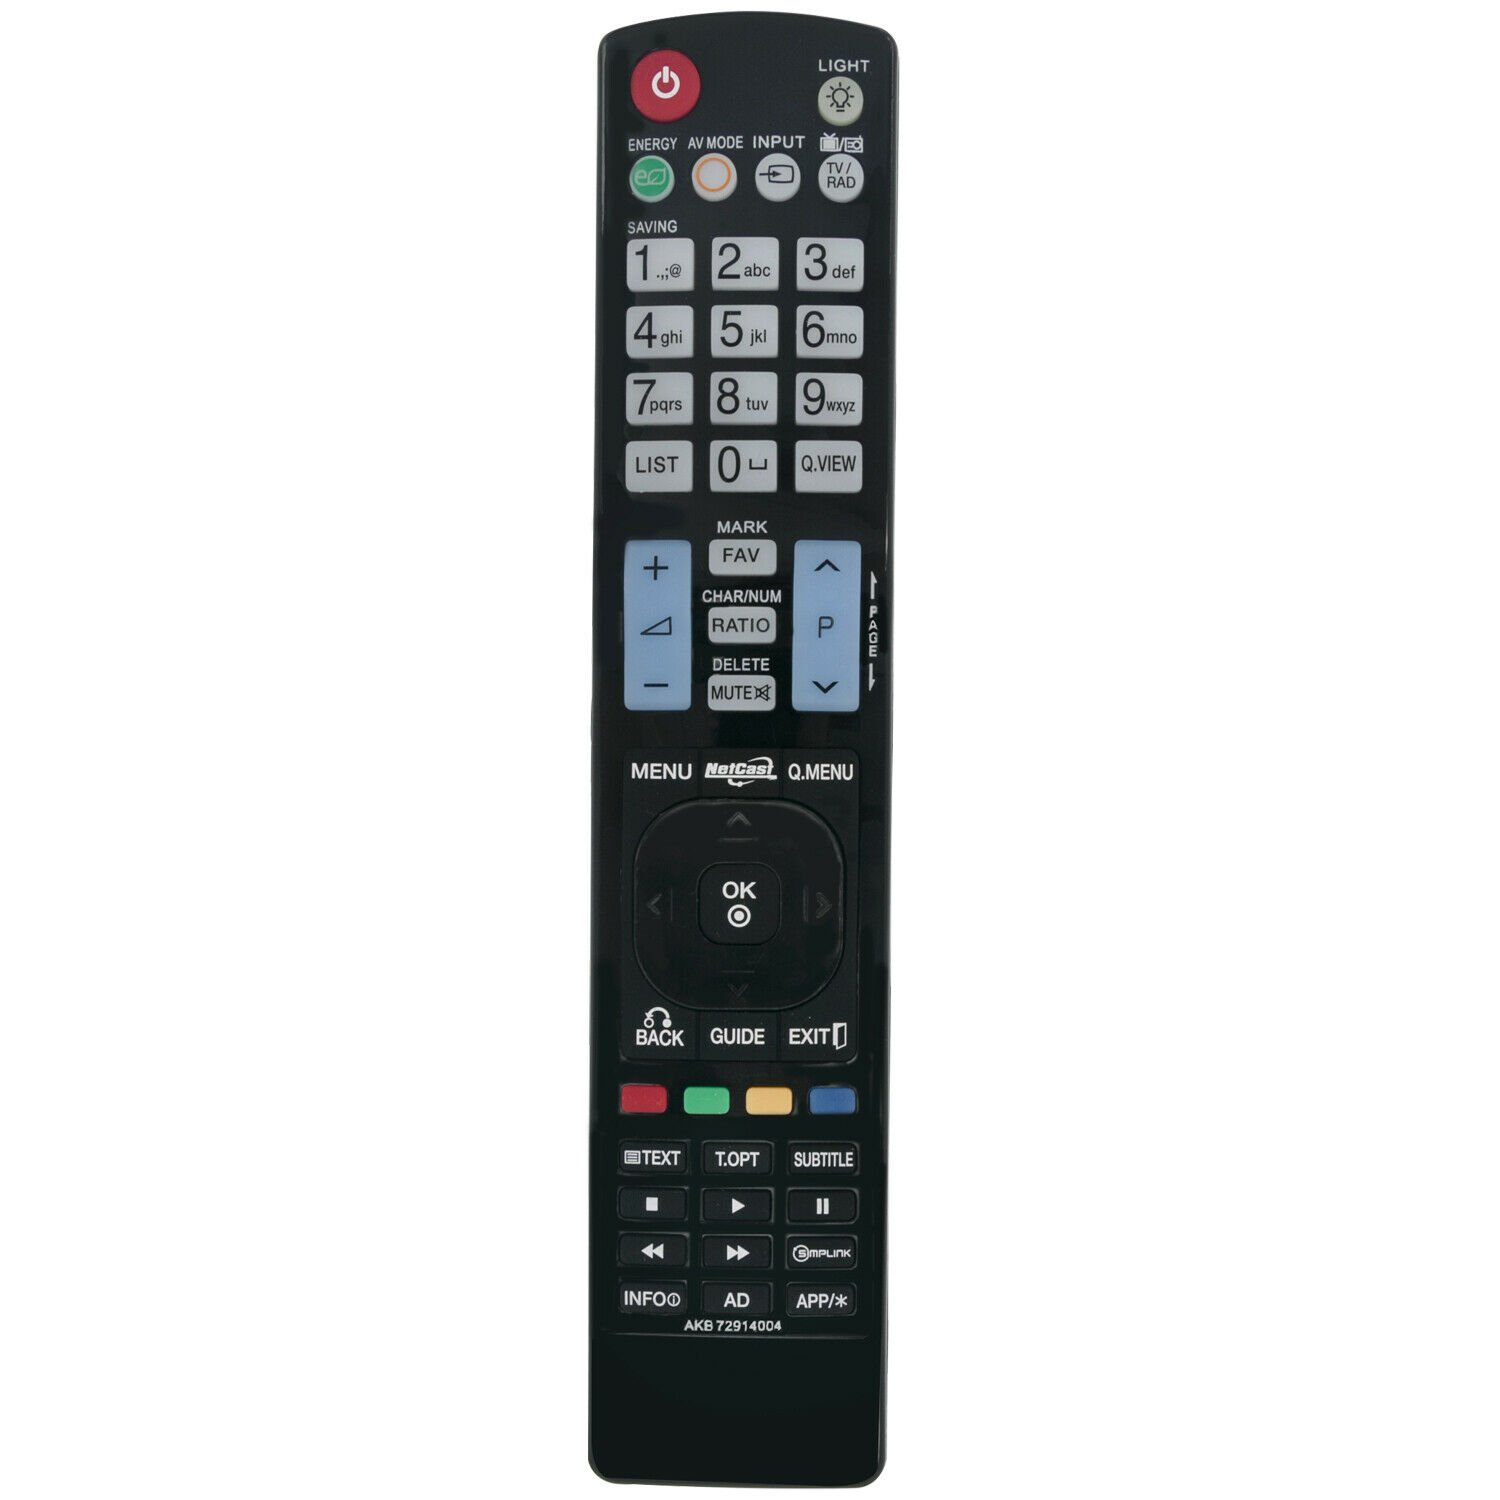 New AKB72914004 Replace Remote for LG TV 32LD650 42LD650 47LD650 55LD650 52LD550 - image 2 of 4